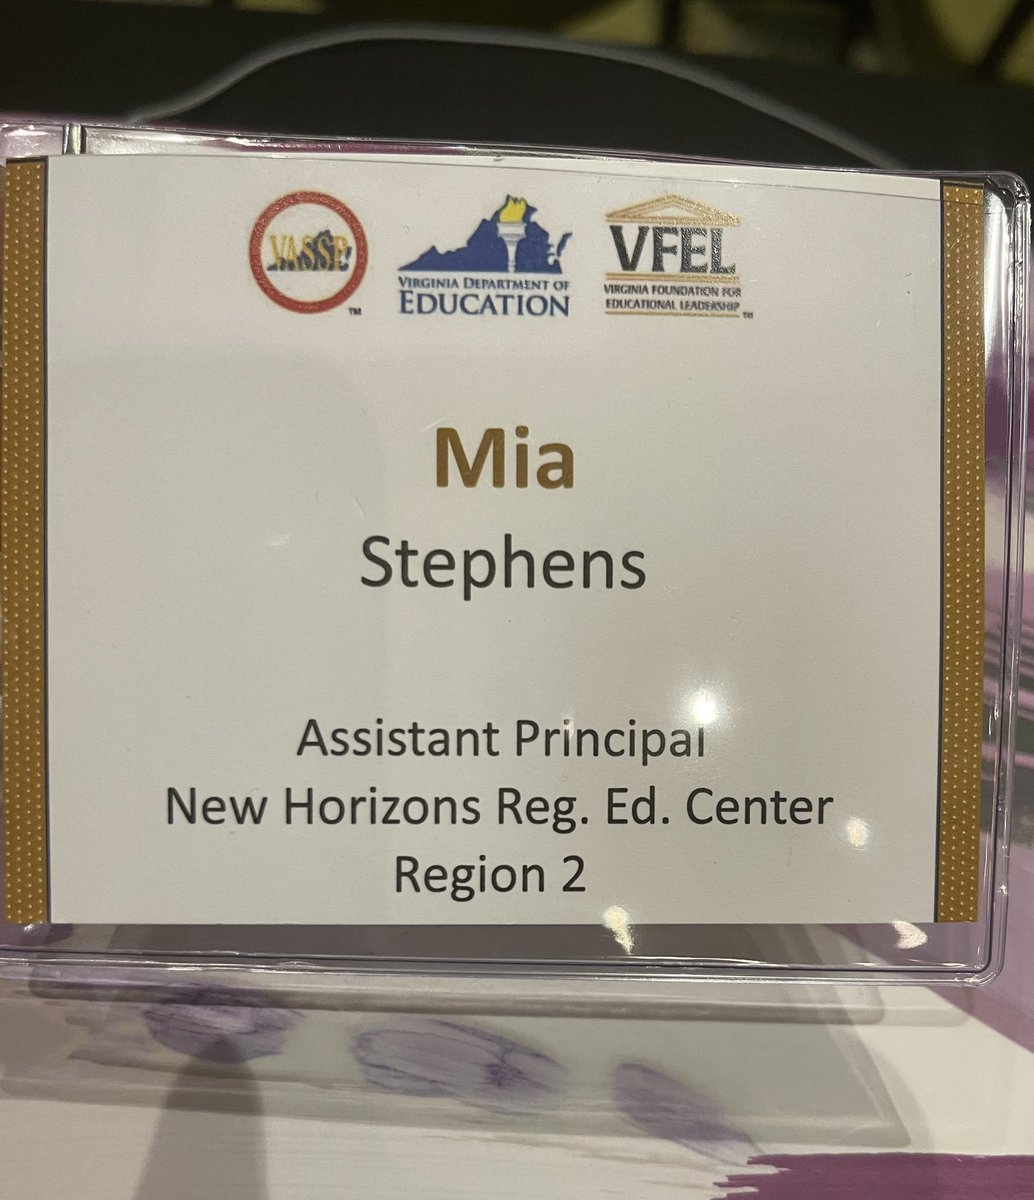 Attending the 95th Annual Virginia Association of Secondary School Principals!  I am excited to be learning amongst so many professional secondary school leaders! @VaPrincipals #OppAwaits23 #BoldlyLearning #NHREC